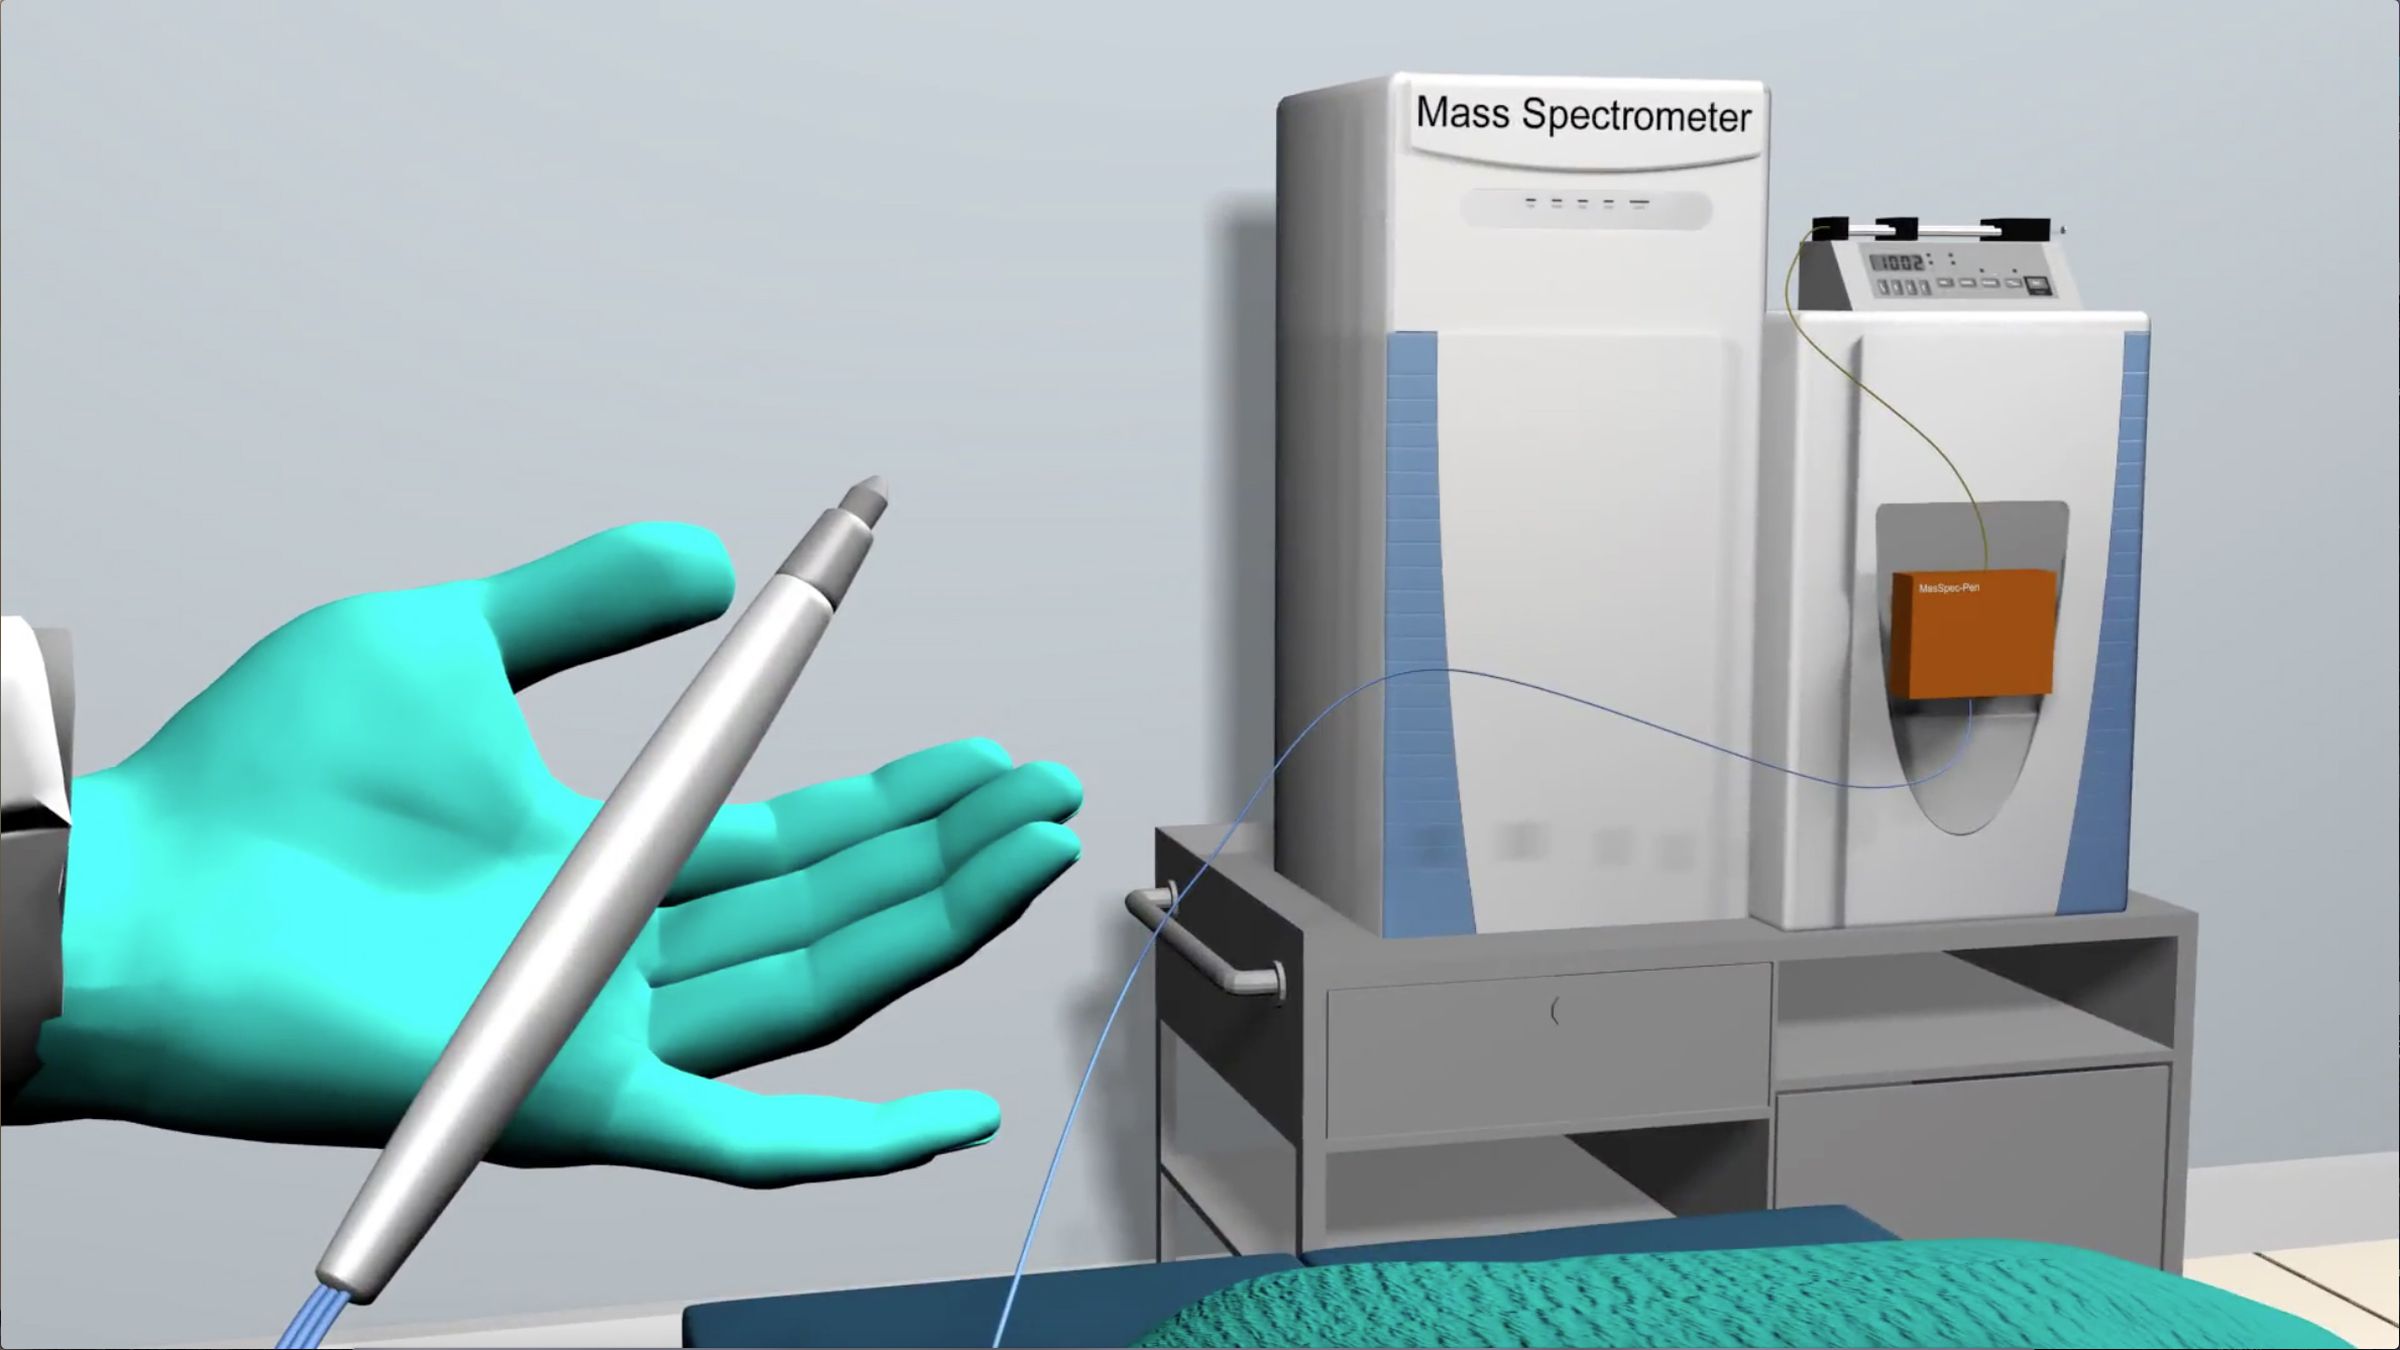 An illustration of the pen and the instrument, called a mass spectrometer, that analyzes the tissue.